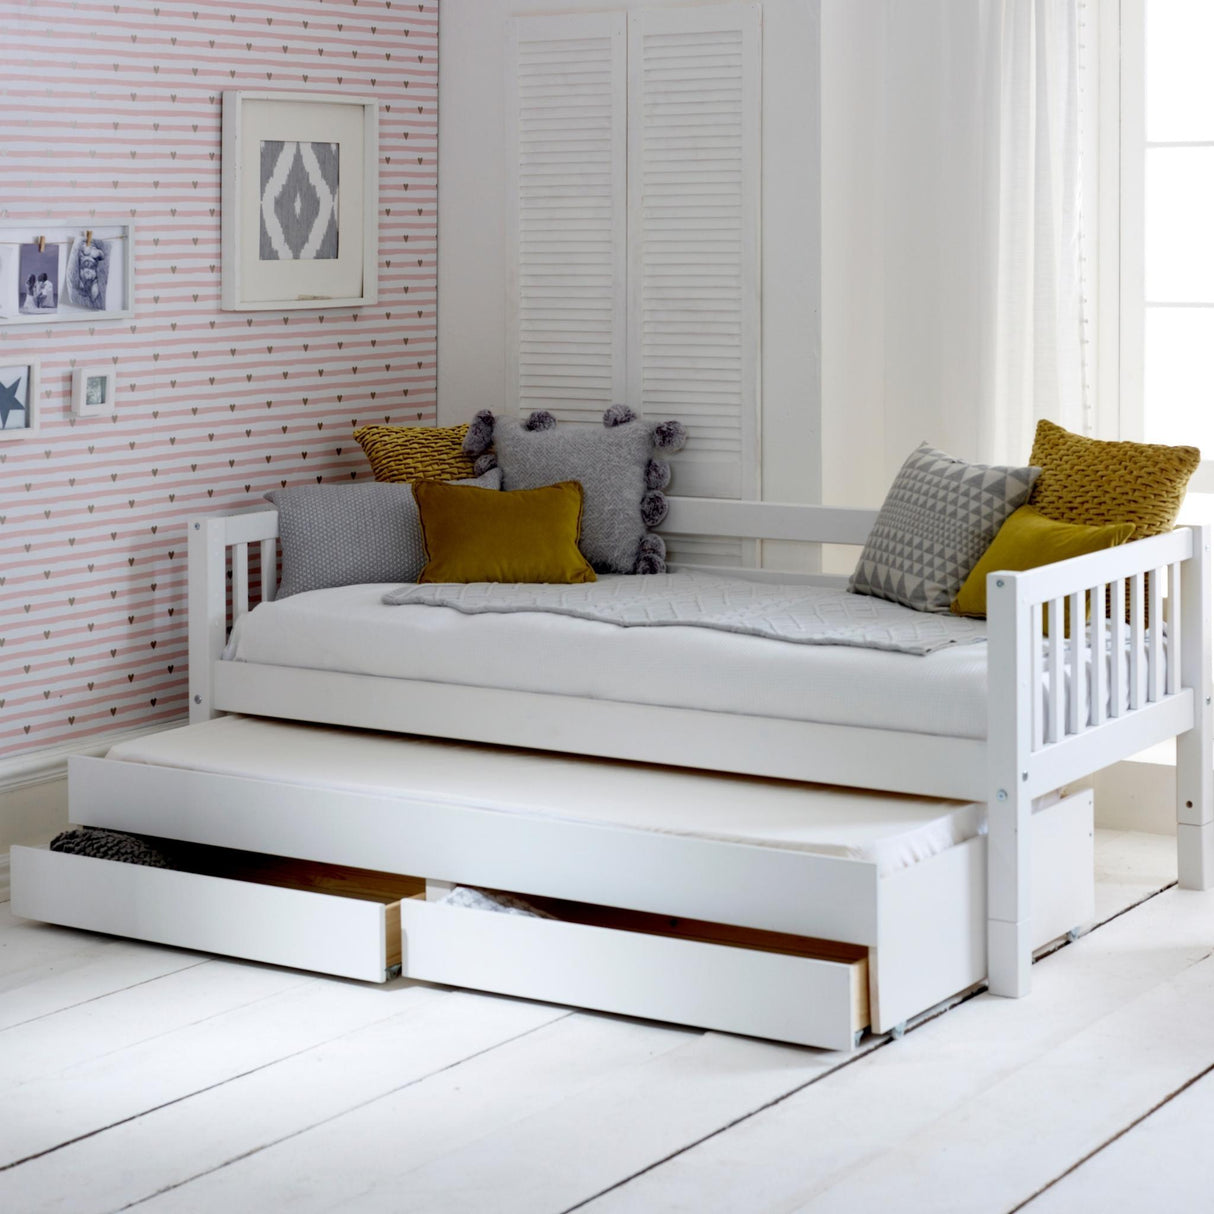 Thuka Nordic Daybed 1 with Slatted Panels - Little Snoozes